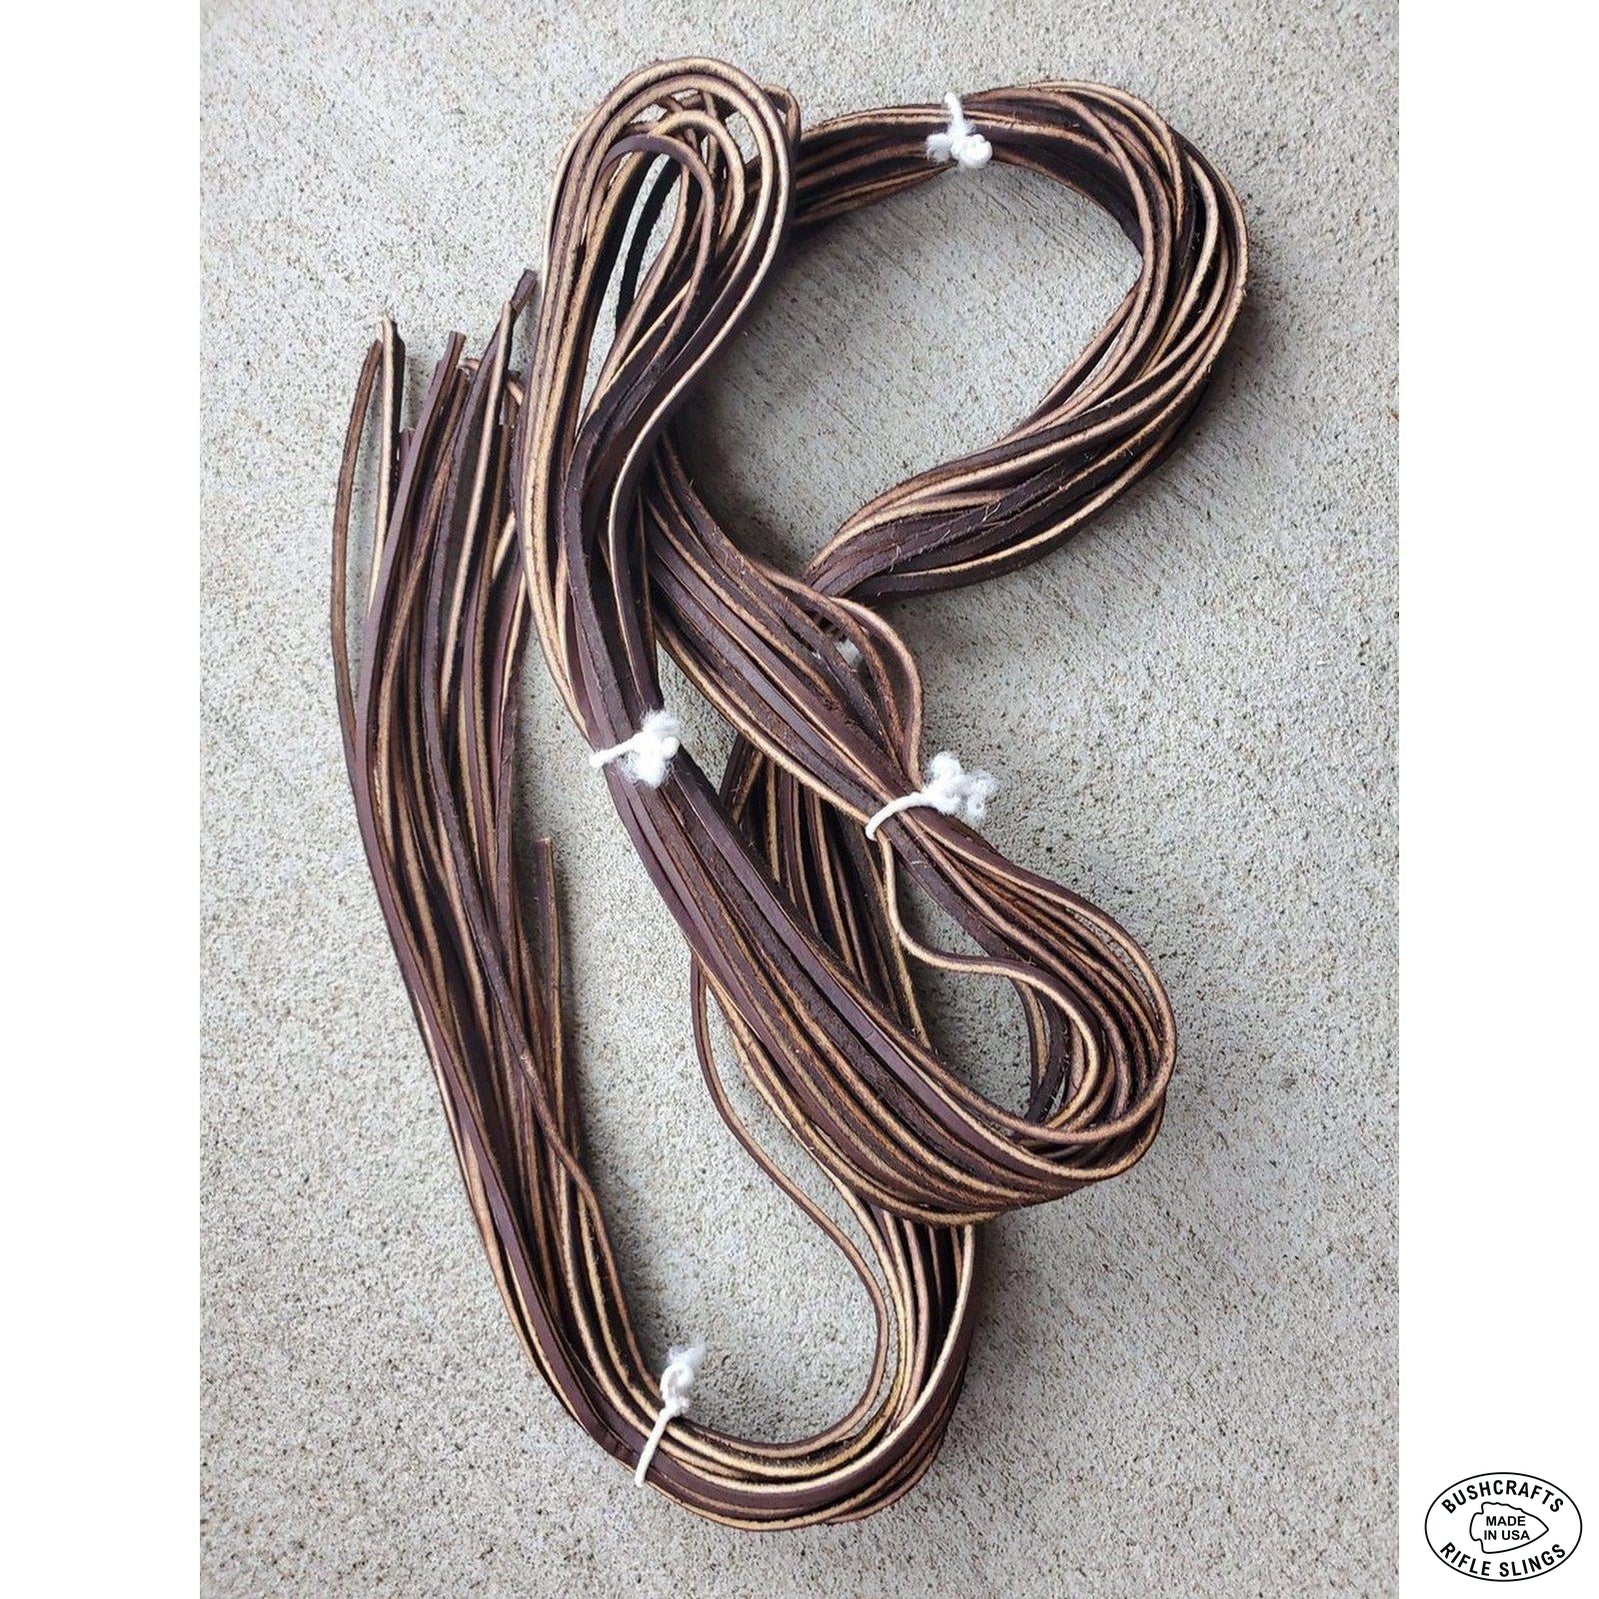 Alum Tanned Leather Laces - Sierra Dark Brown, 1/8” x 72”